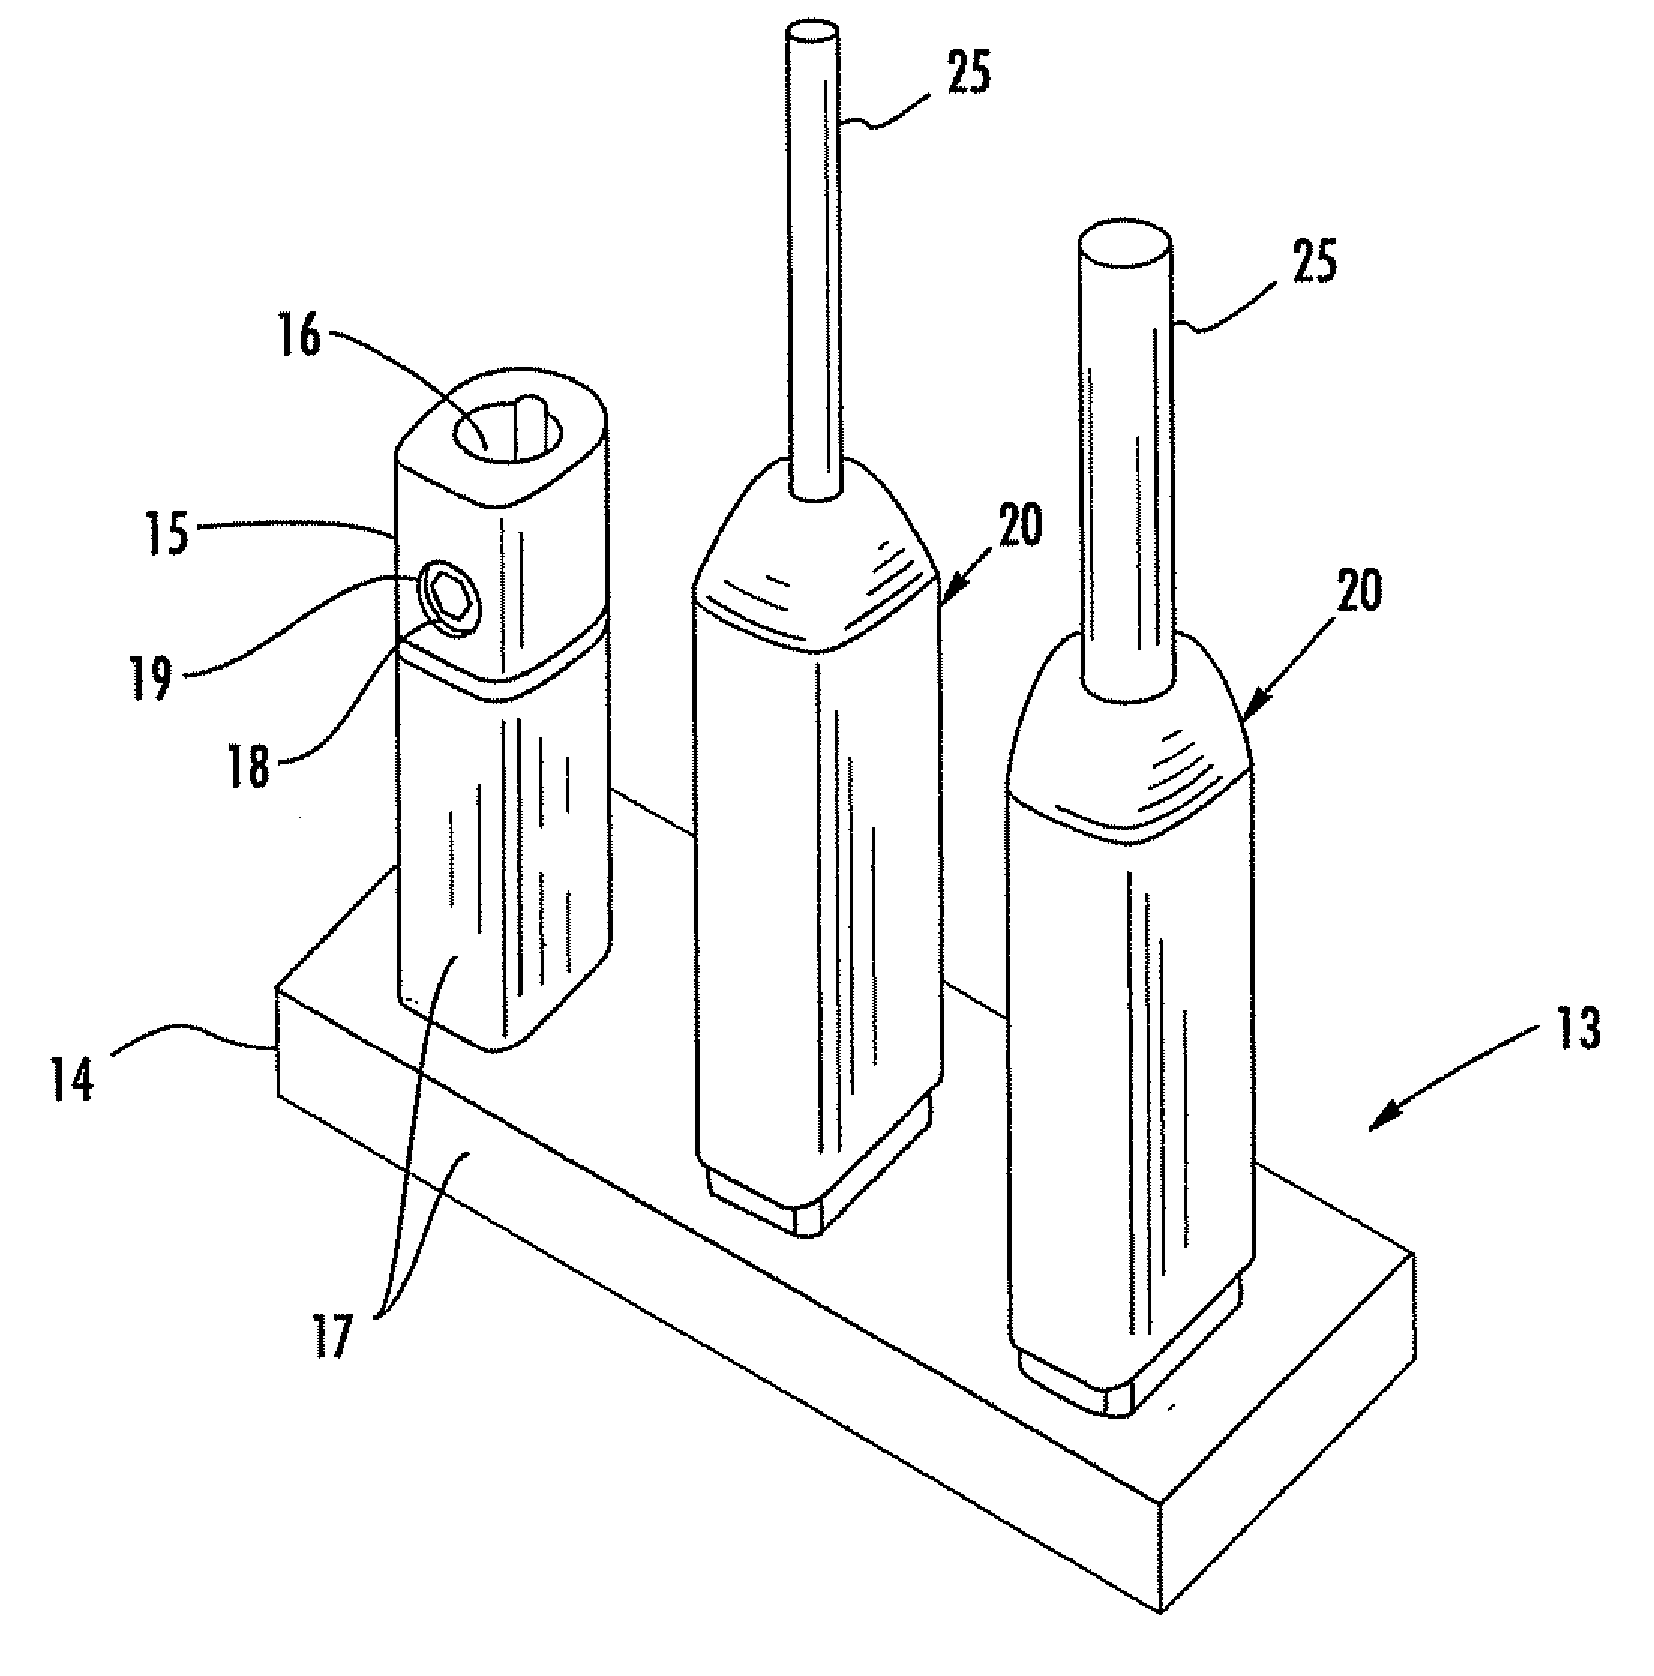 Connector insulating boot for different sized conductors and associated methods